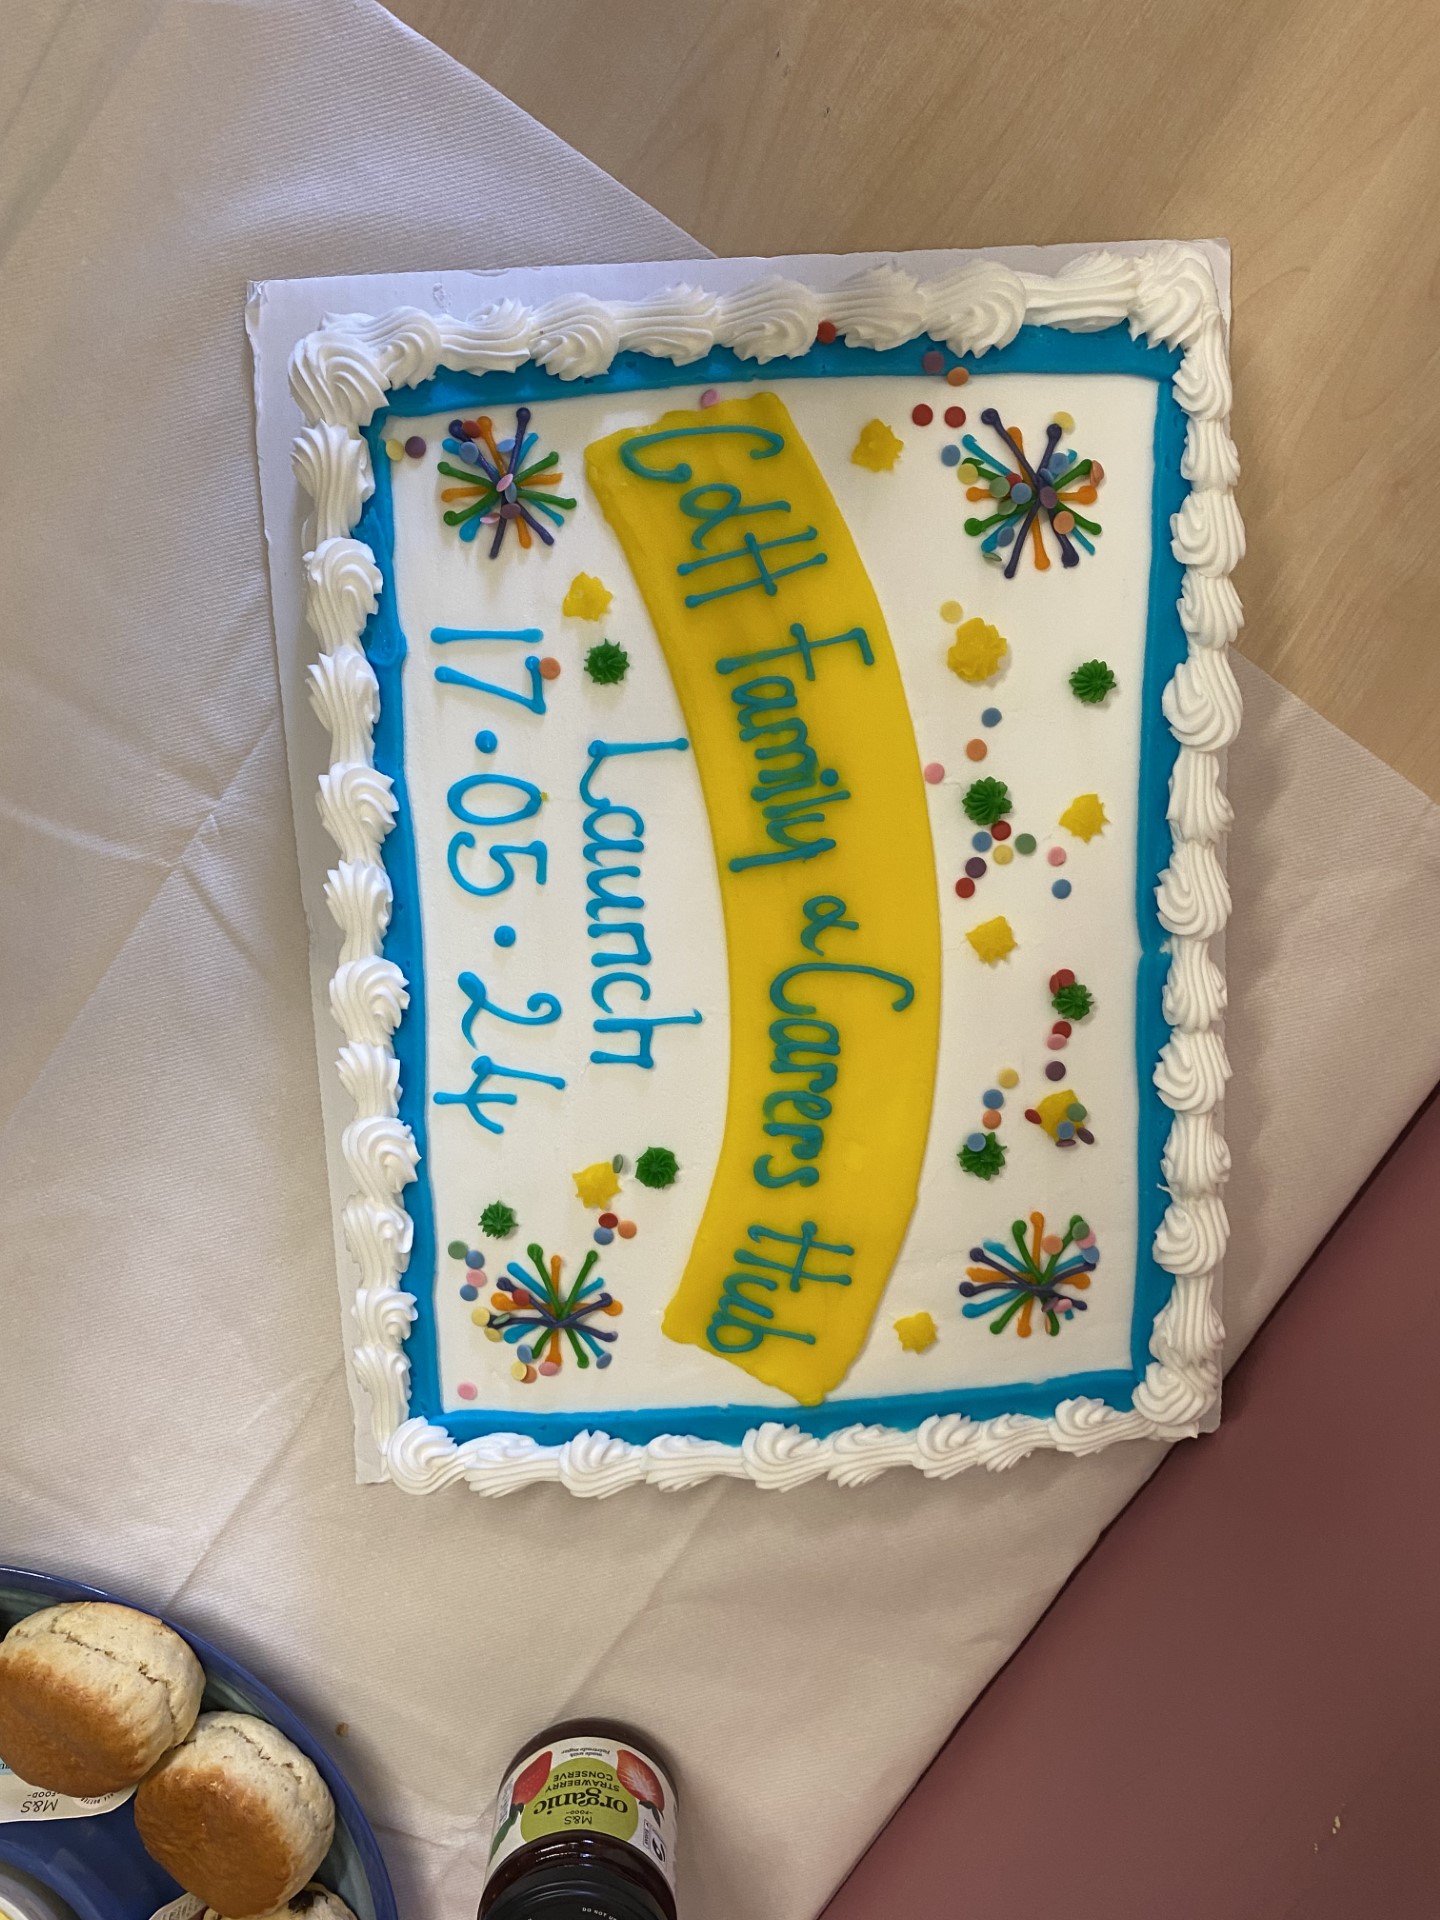 Cake from the launch of the City and Hackney Family, Friends and Carers Hub 